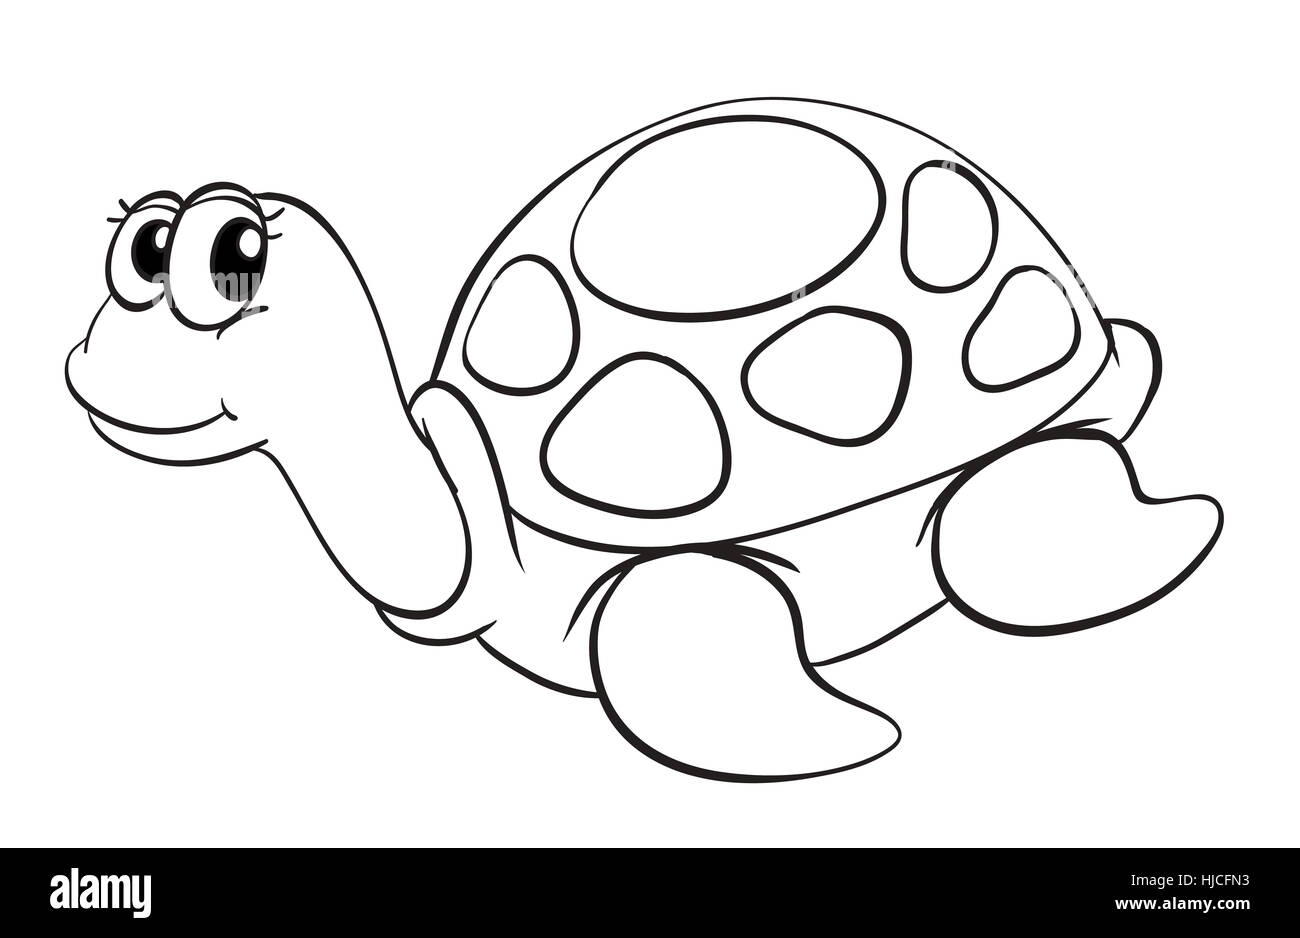 illustration of a tortoise sketch on a white background Stock Photo